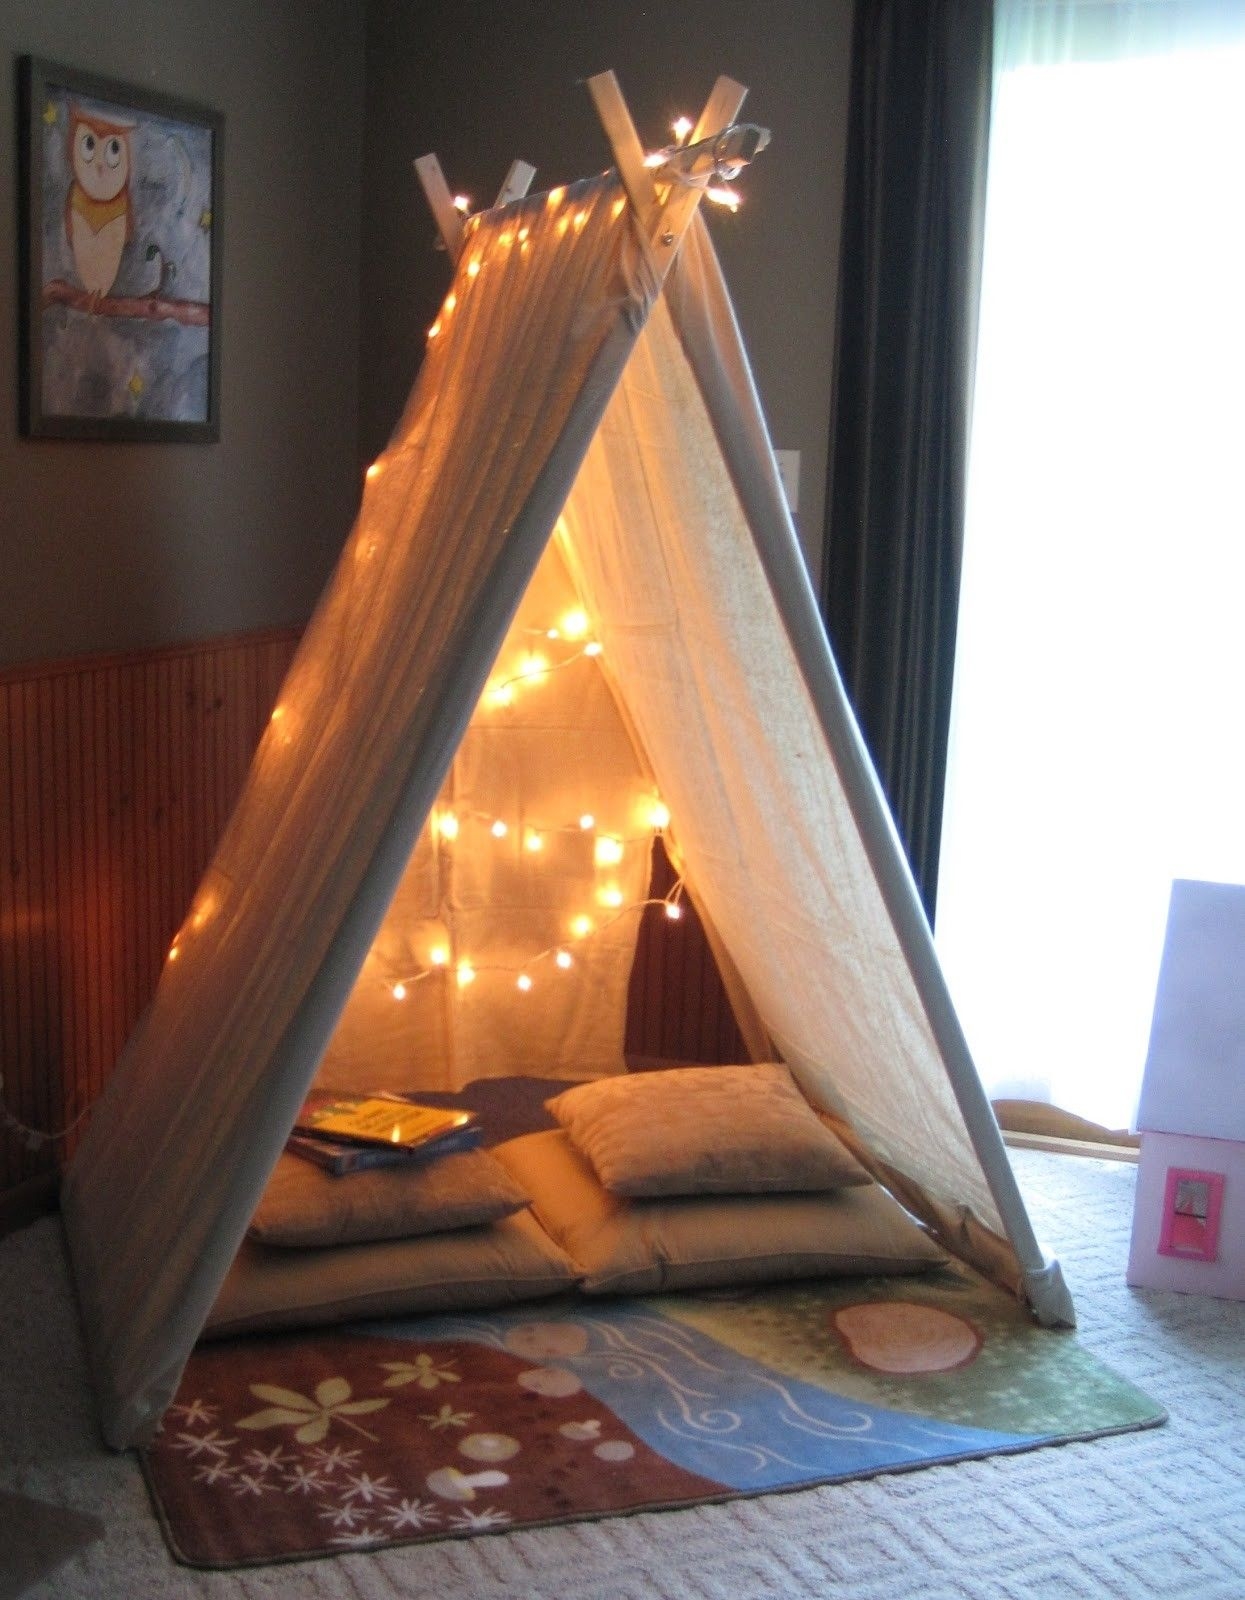 Pup tents for kids